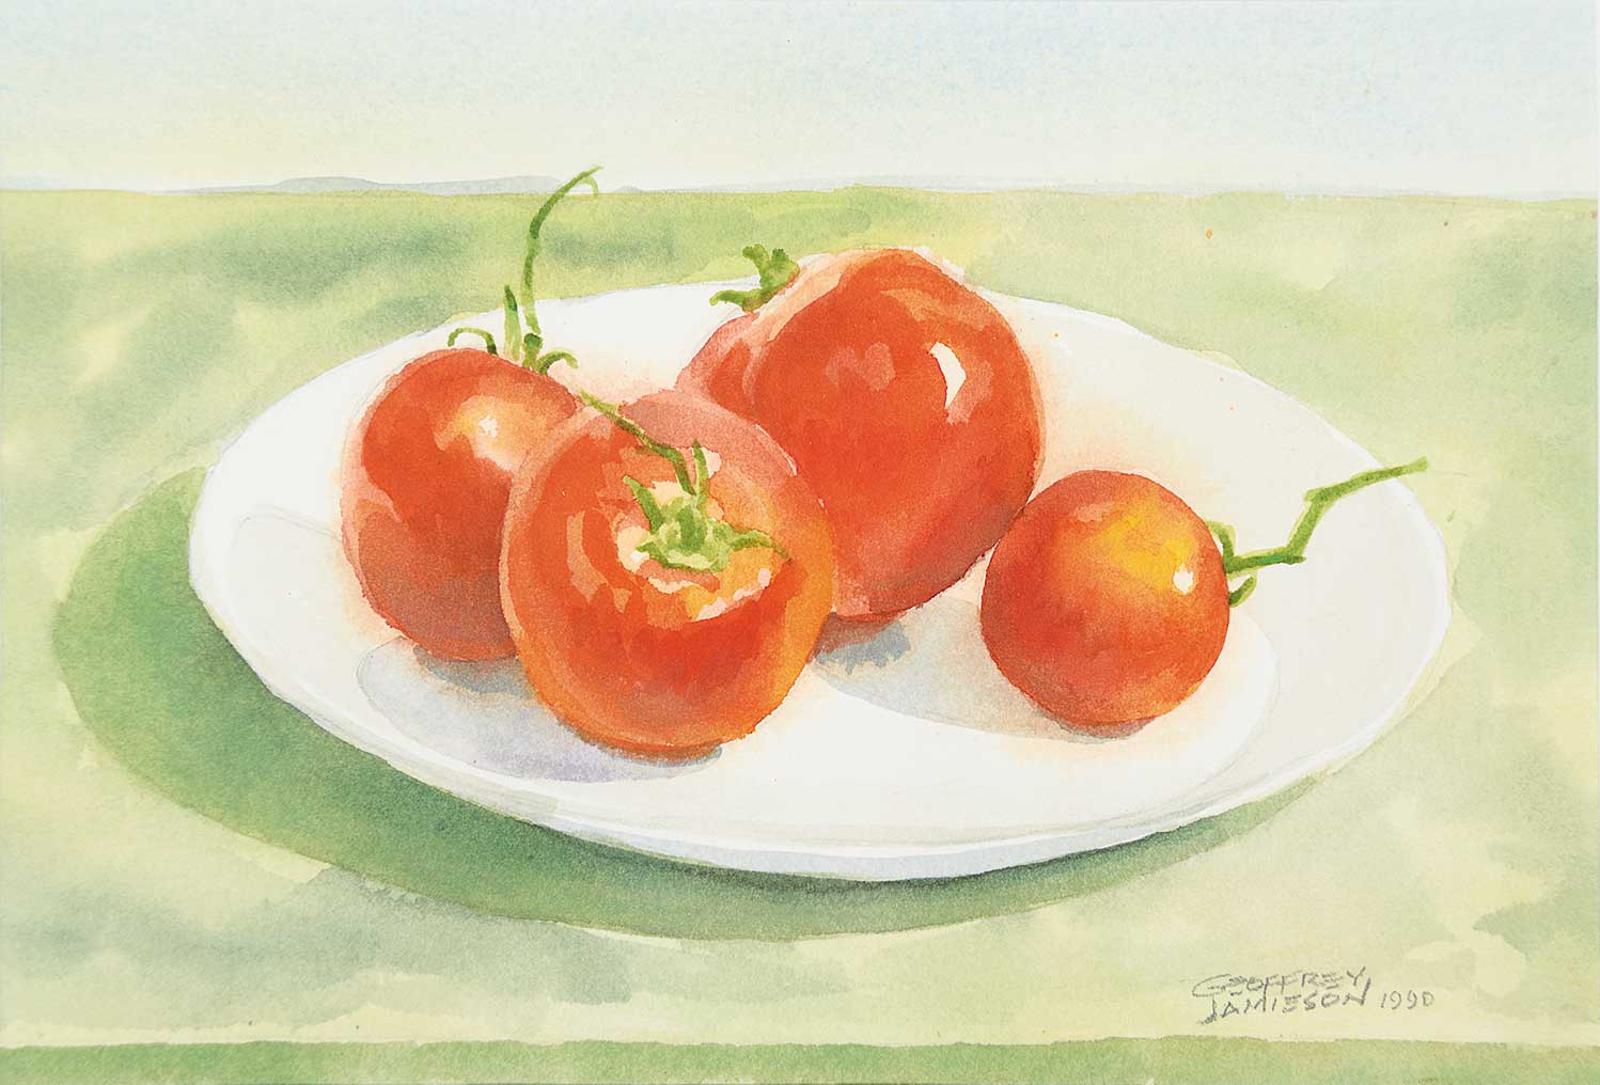 Geoffrey James (1942) - Untitled - Plate of Tomatoes